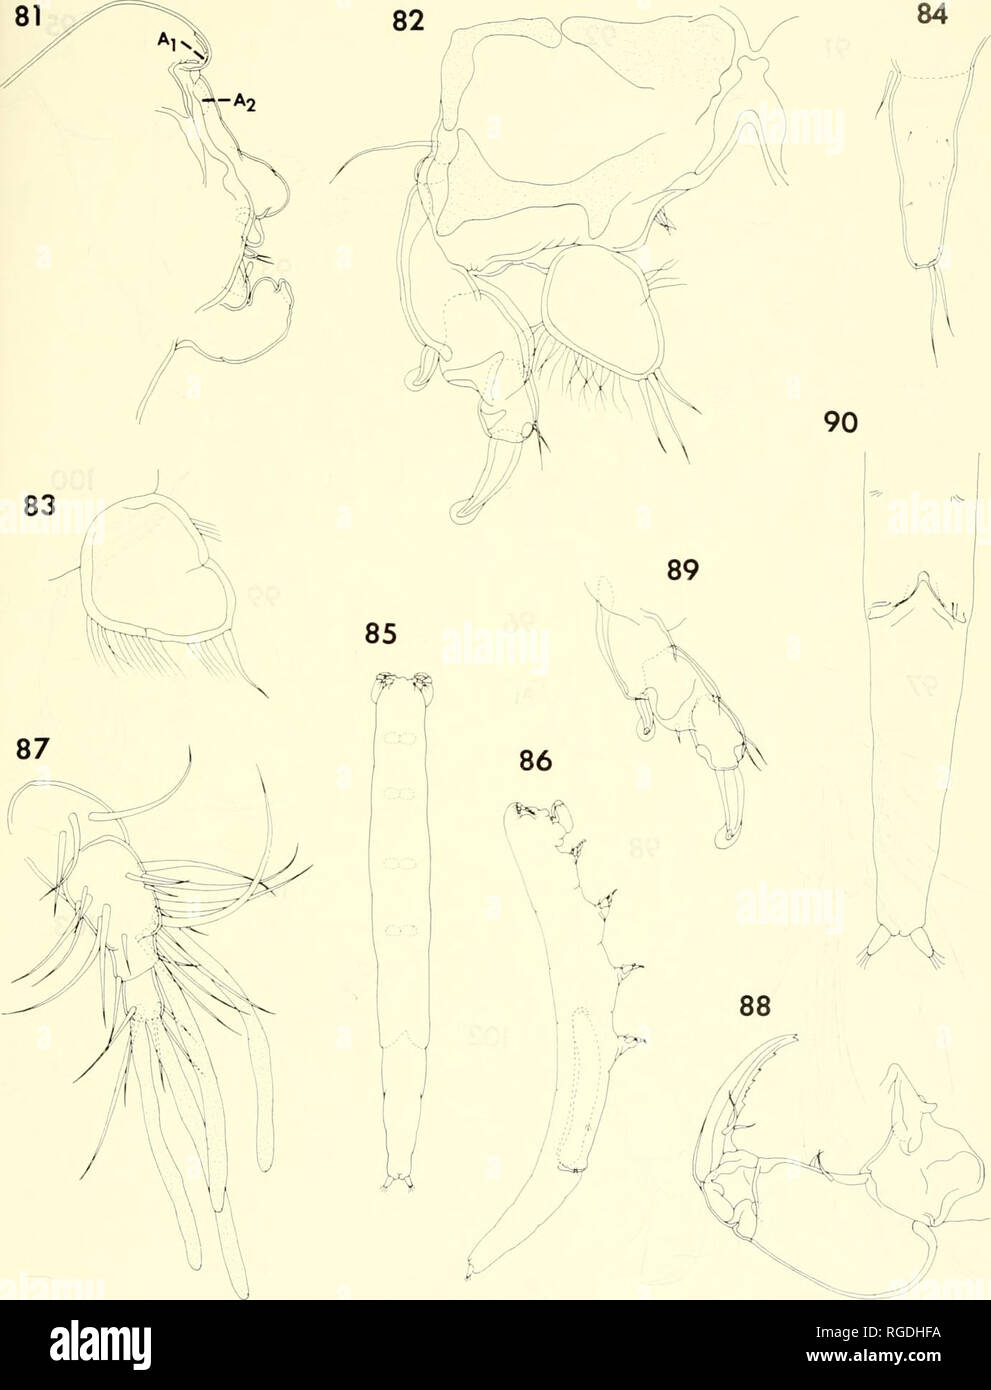 . Bulletin of the Museum of Comparative Zoology at Harvard College. Zoology. Parasitic Copepods from Corals ix Madagascar • Humes and Ho 445. Figures 81-84. Xanfio lissa n. sp., female (continued). 81, anterior part of body, lateral (F); 82, leg 1 and inter- coxal plate, posterior (D); 83, endopod of leg 3, posterior (D); 84, leg 5, lateral (G|. Figures 85-90. Xarifia /issa n. sp., mole. 85, body, dorsal (A); 86, body, lateral (A); 87, first antenna, anteroventral (D); 88, maxilliped, inner (G); 89, exopod of log 1, posterior (D); 90, urosome, ventral (B).. Please note that these images are ex Stock Photo